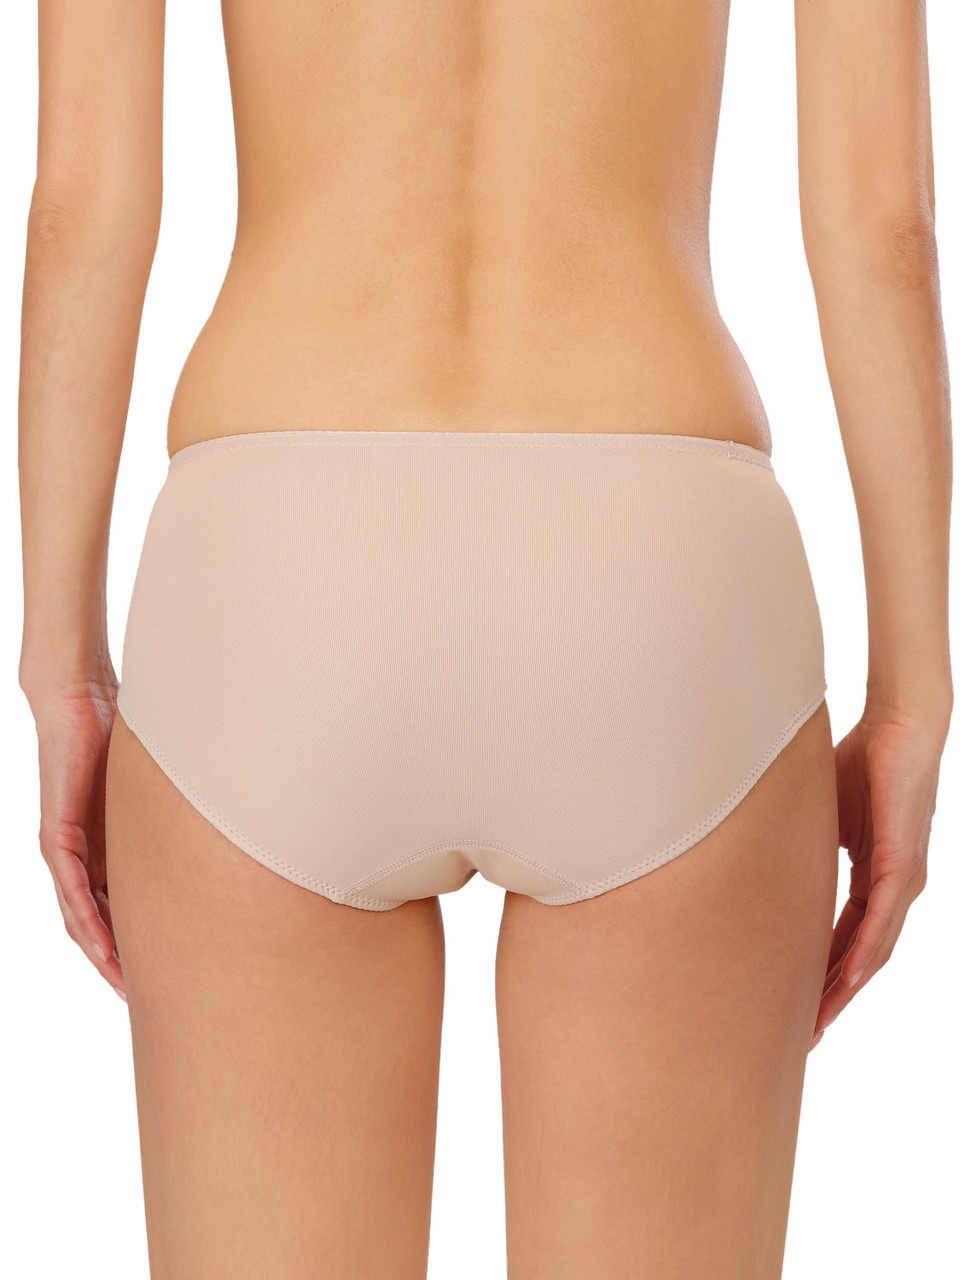 SOLID AND POCKET GIRDLE PANTY-69083 (12pc)